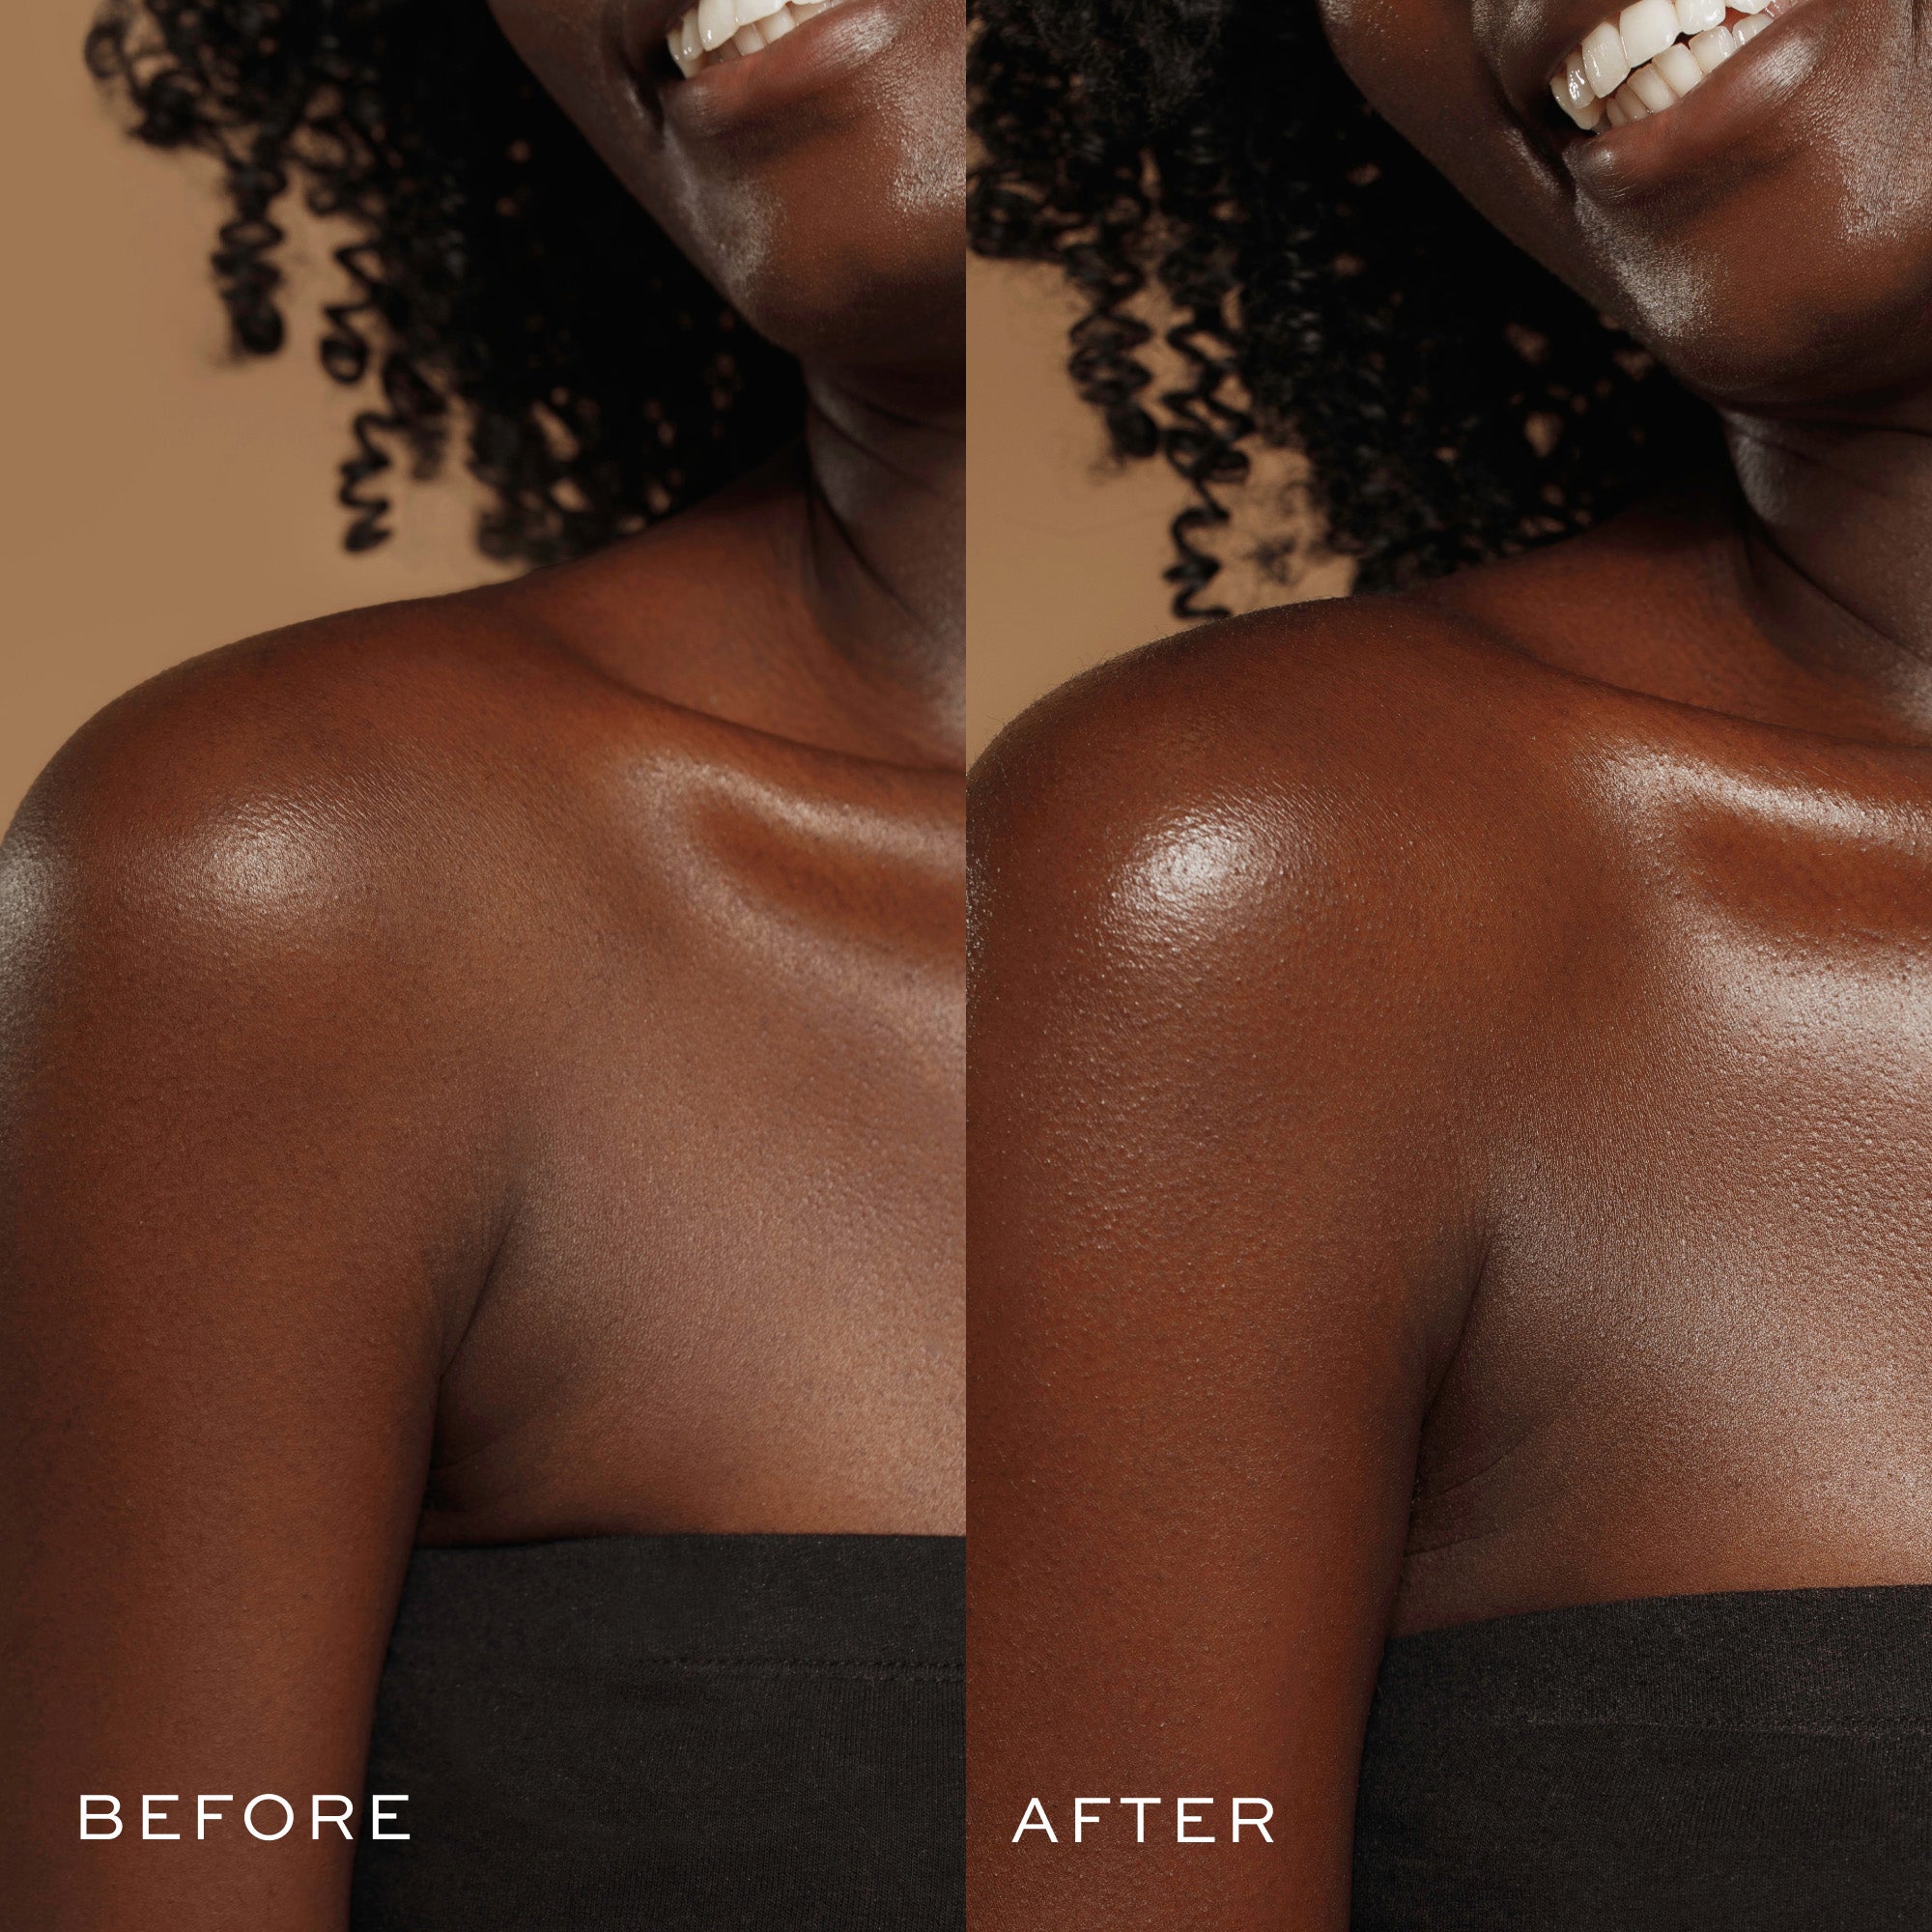 a woman smiling and before and after a tanning procedure